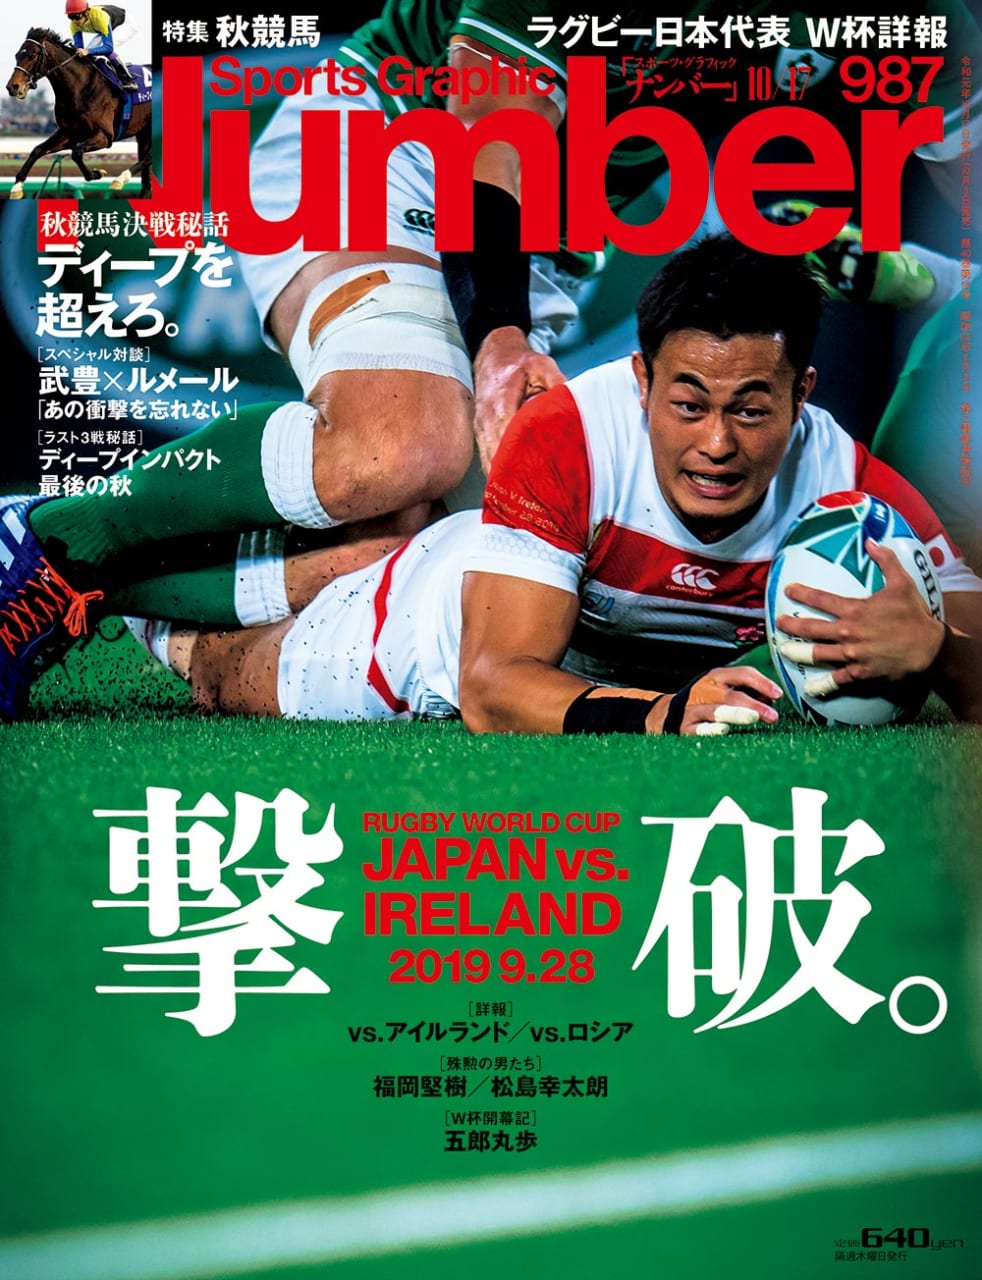 Sports Graphic Number 987号
2019年10月3日発売
表紙撮影：スエイシナオヨシ